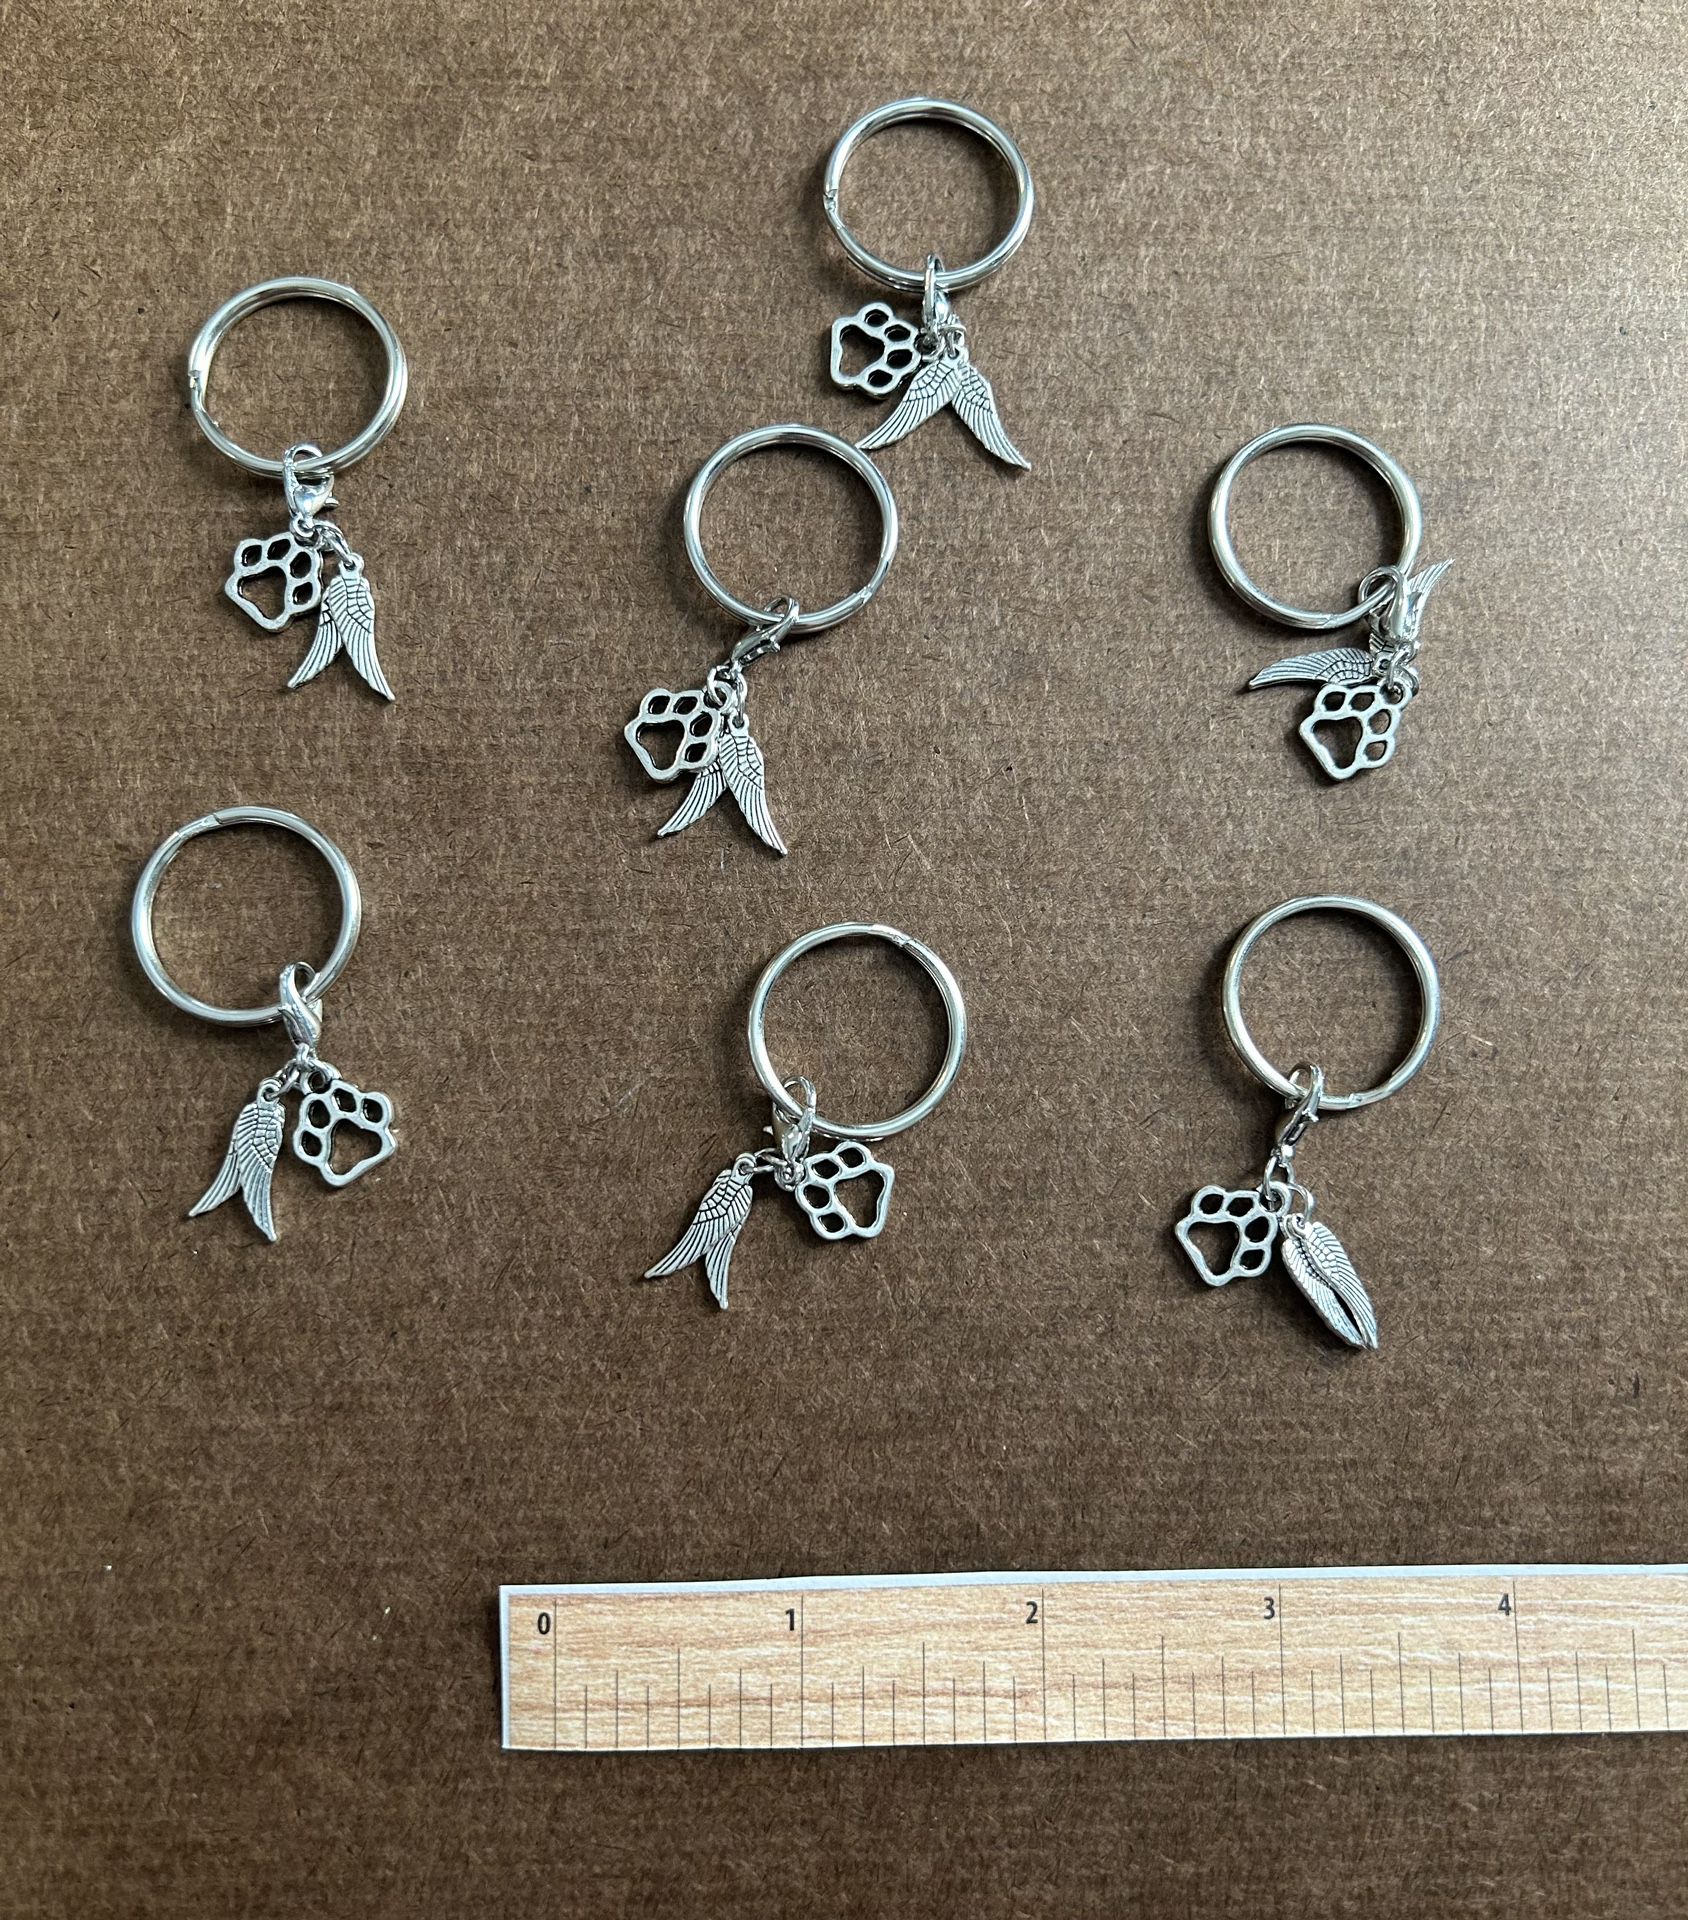 In Loving Memory Of Pet Keychains $1.00 Each